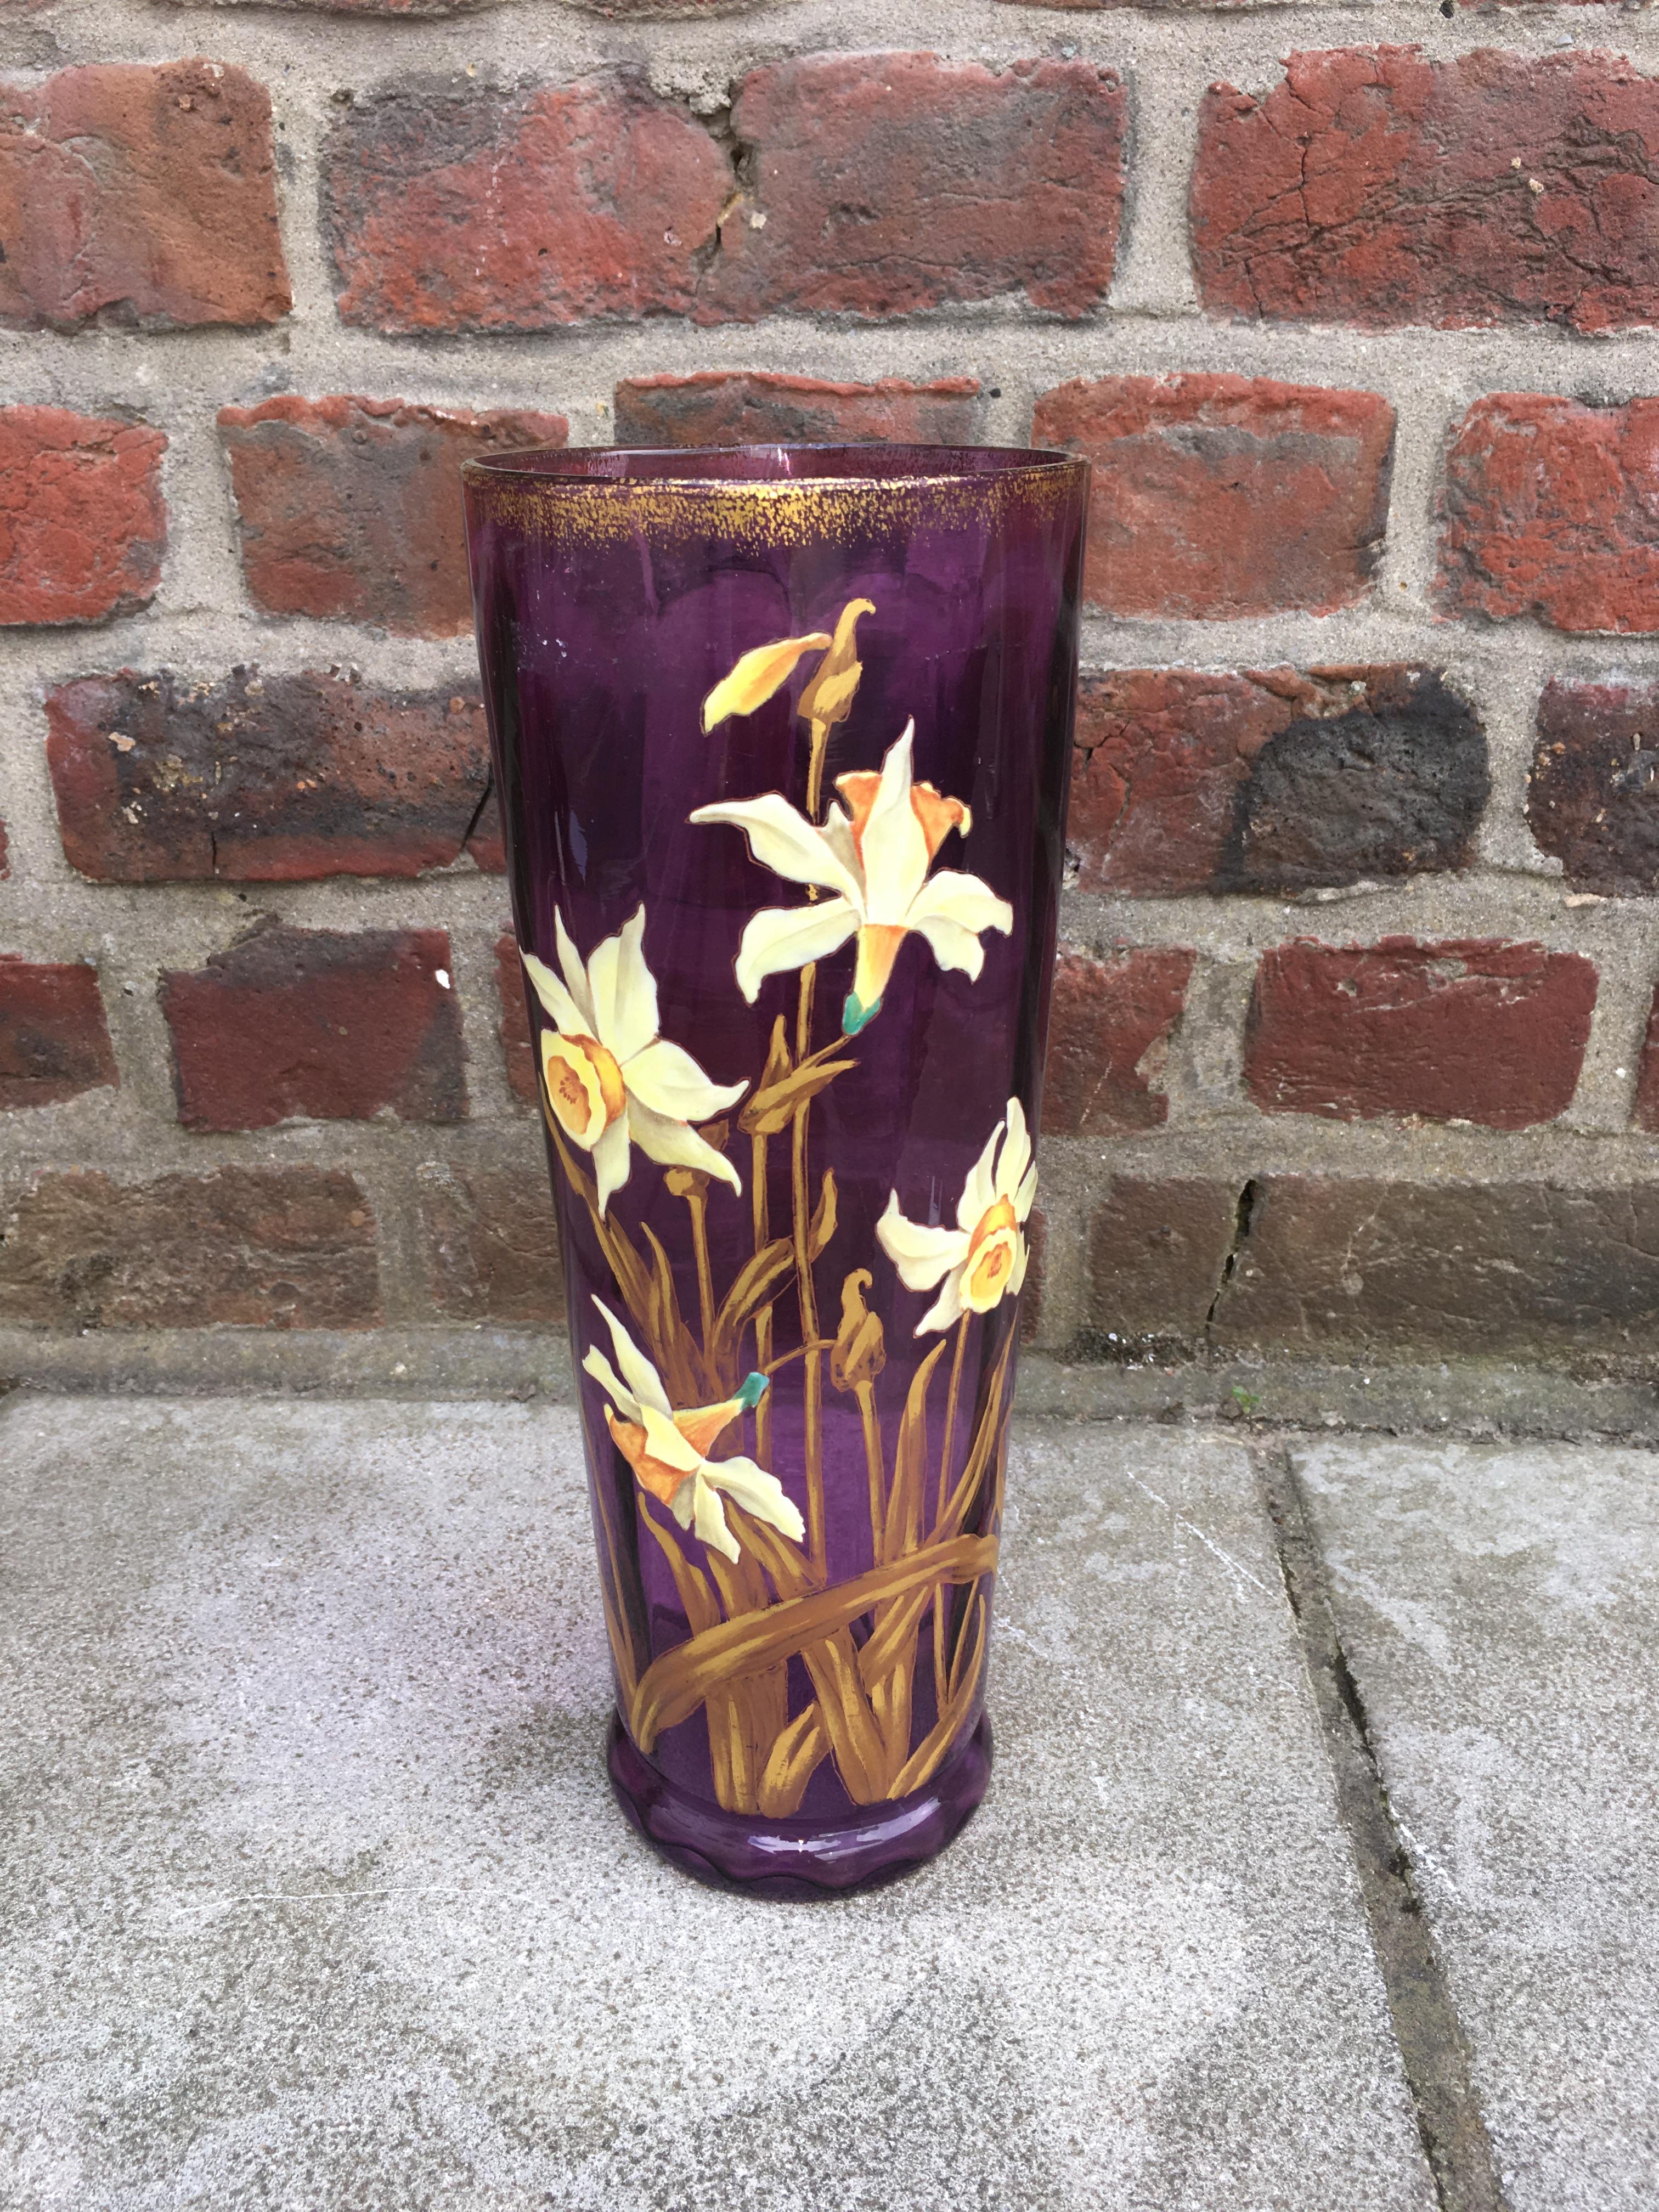 Art Nouveau vase in enameled glass with floral decoration, circa 1900.